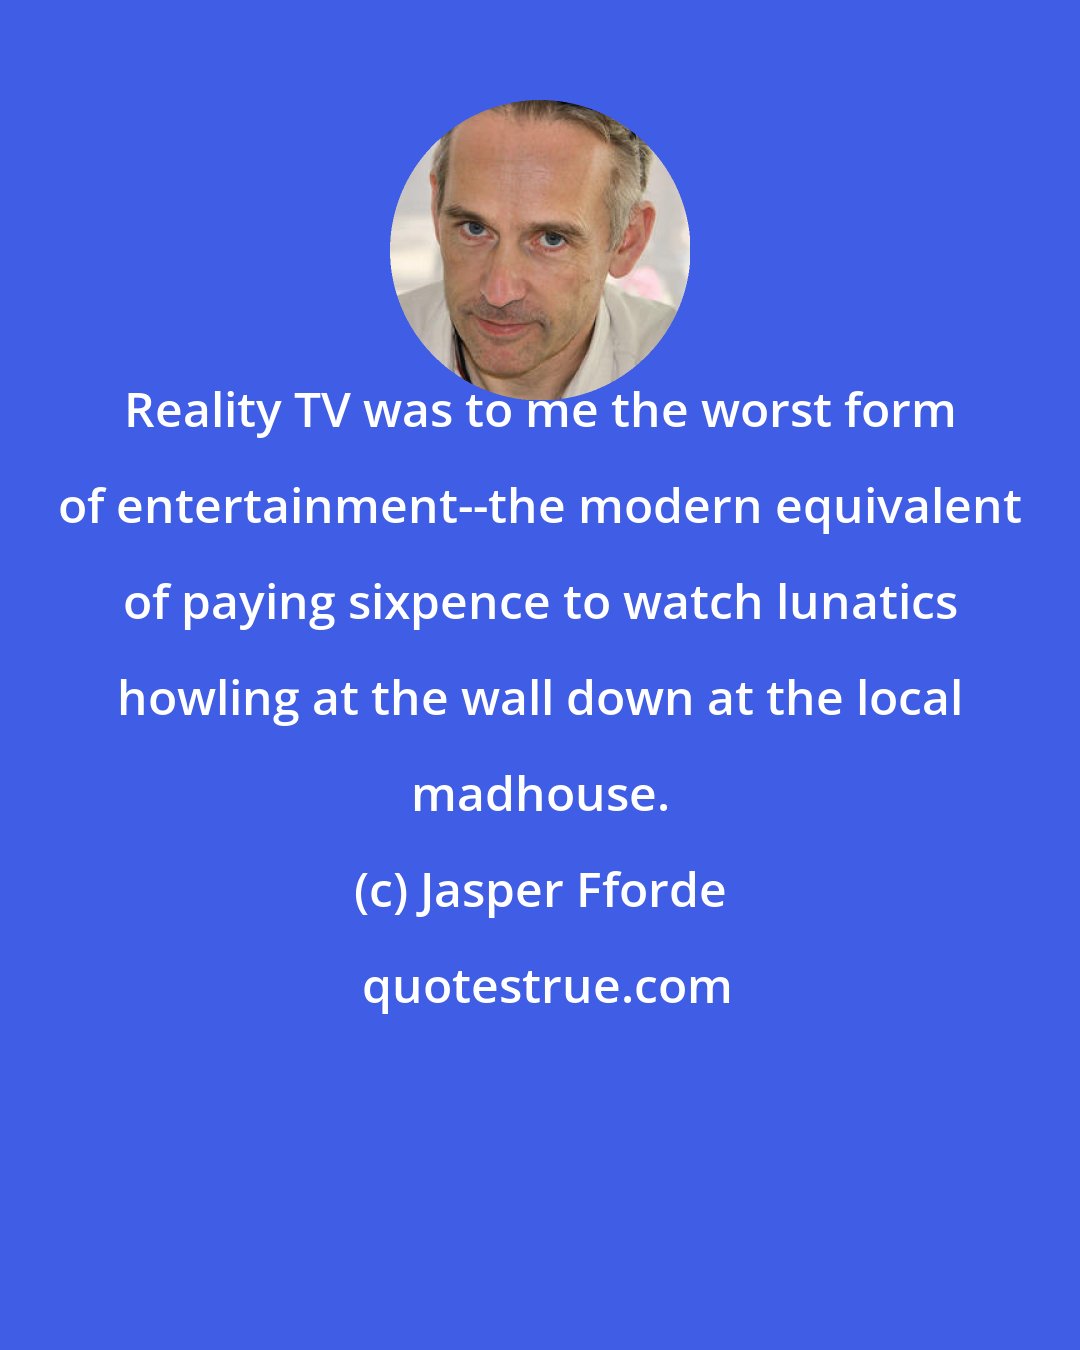 Jasper Fforde: Reality TV was to me the worst form of entertainment--the modern equivalent of paying sixpence to watch lunatics howling at the wall down at the local madhouse.